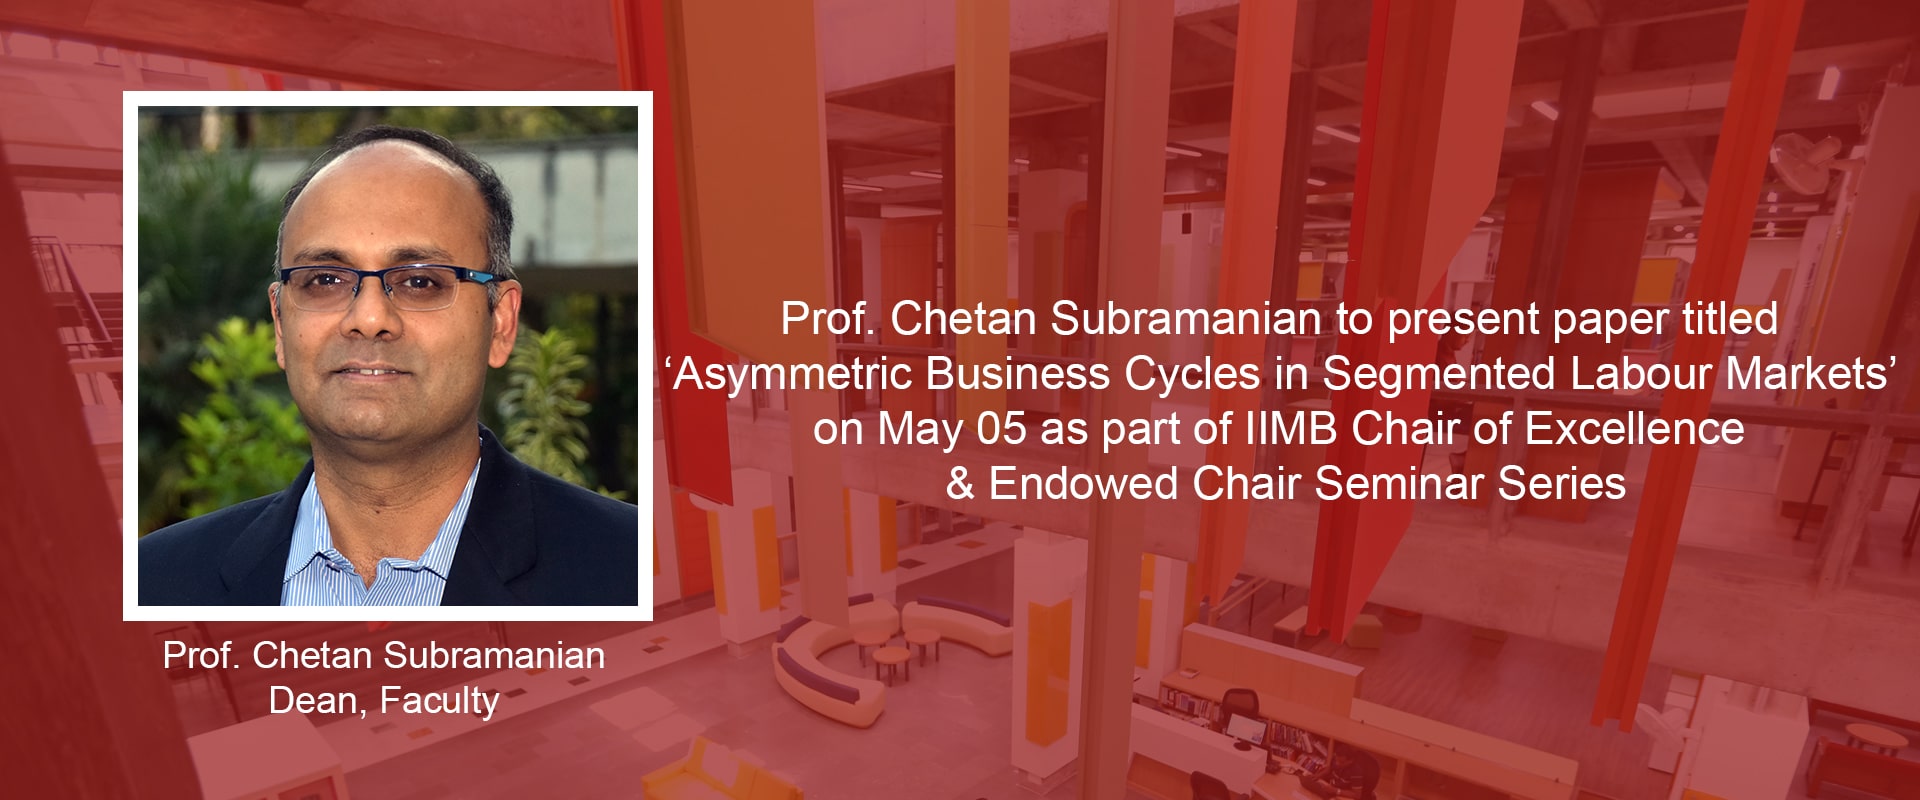 Prof. Chetan Subramanian to present paper titled ‘Asymmetric Business Cycles in Segmented Labour Markets’ on May 05 as part of IIMB Chair of Excellence & Endowed Chair Seminar Series